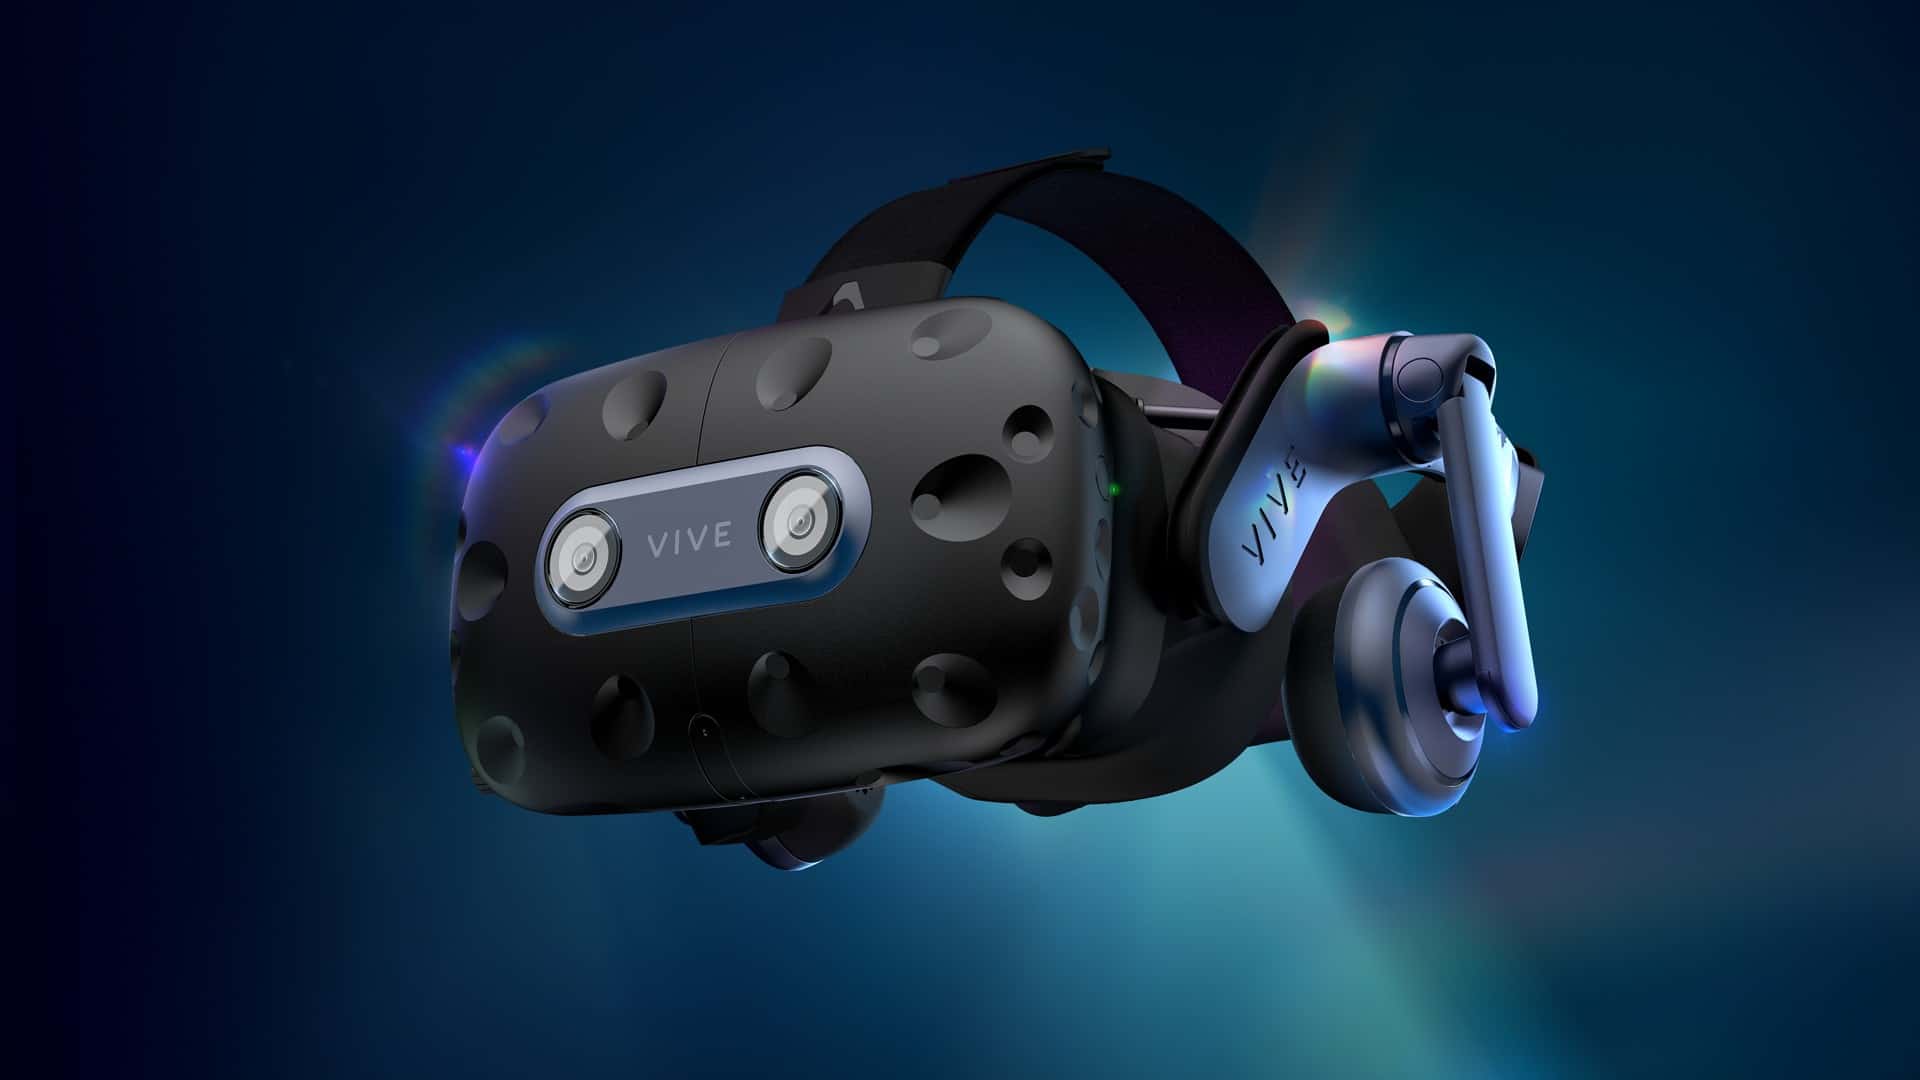 New HTC Vive Pro 2 VR headset coming in June